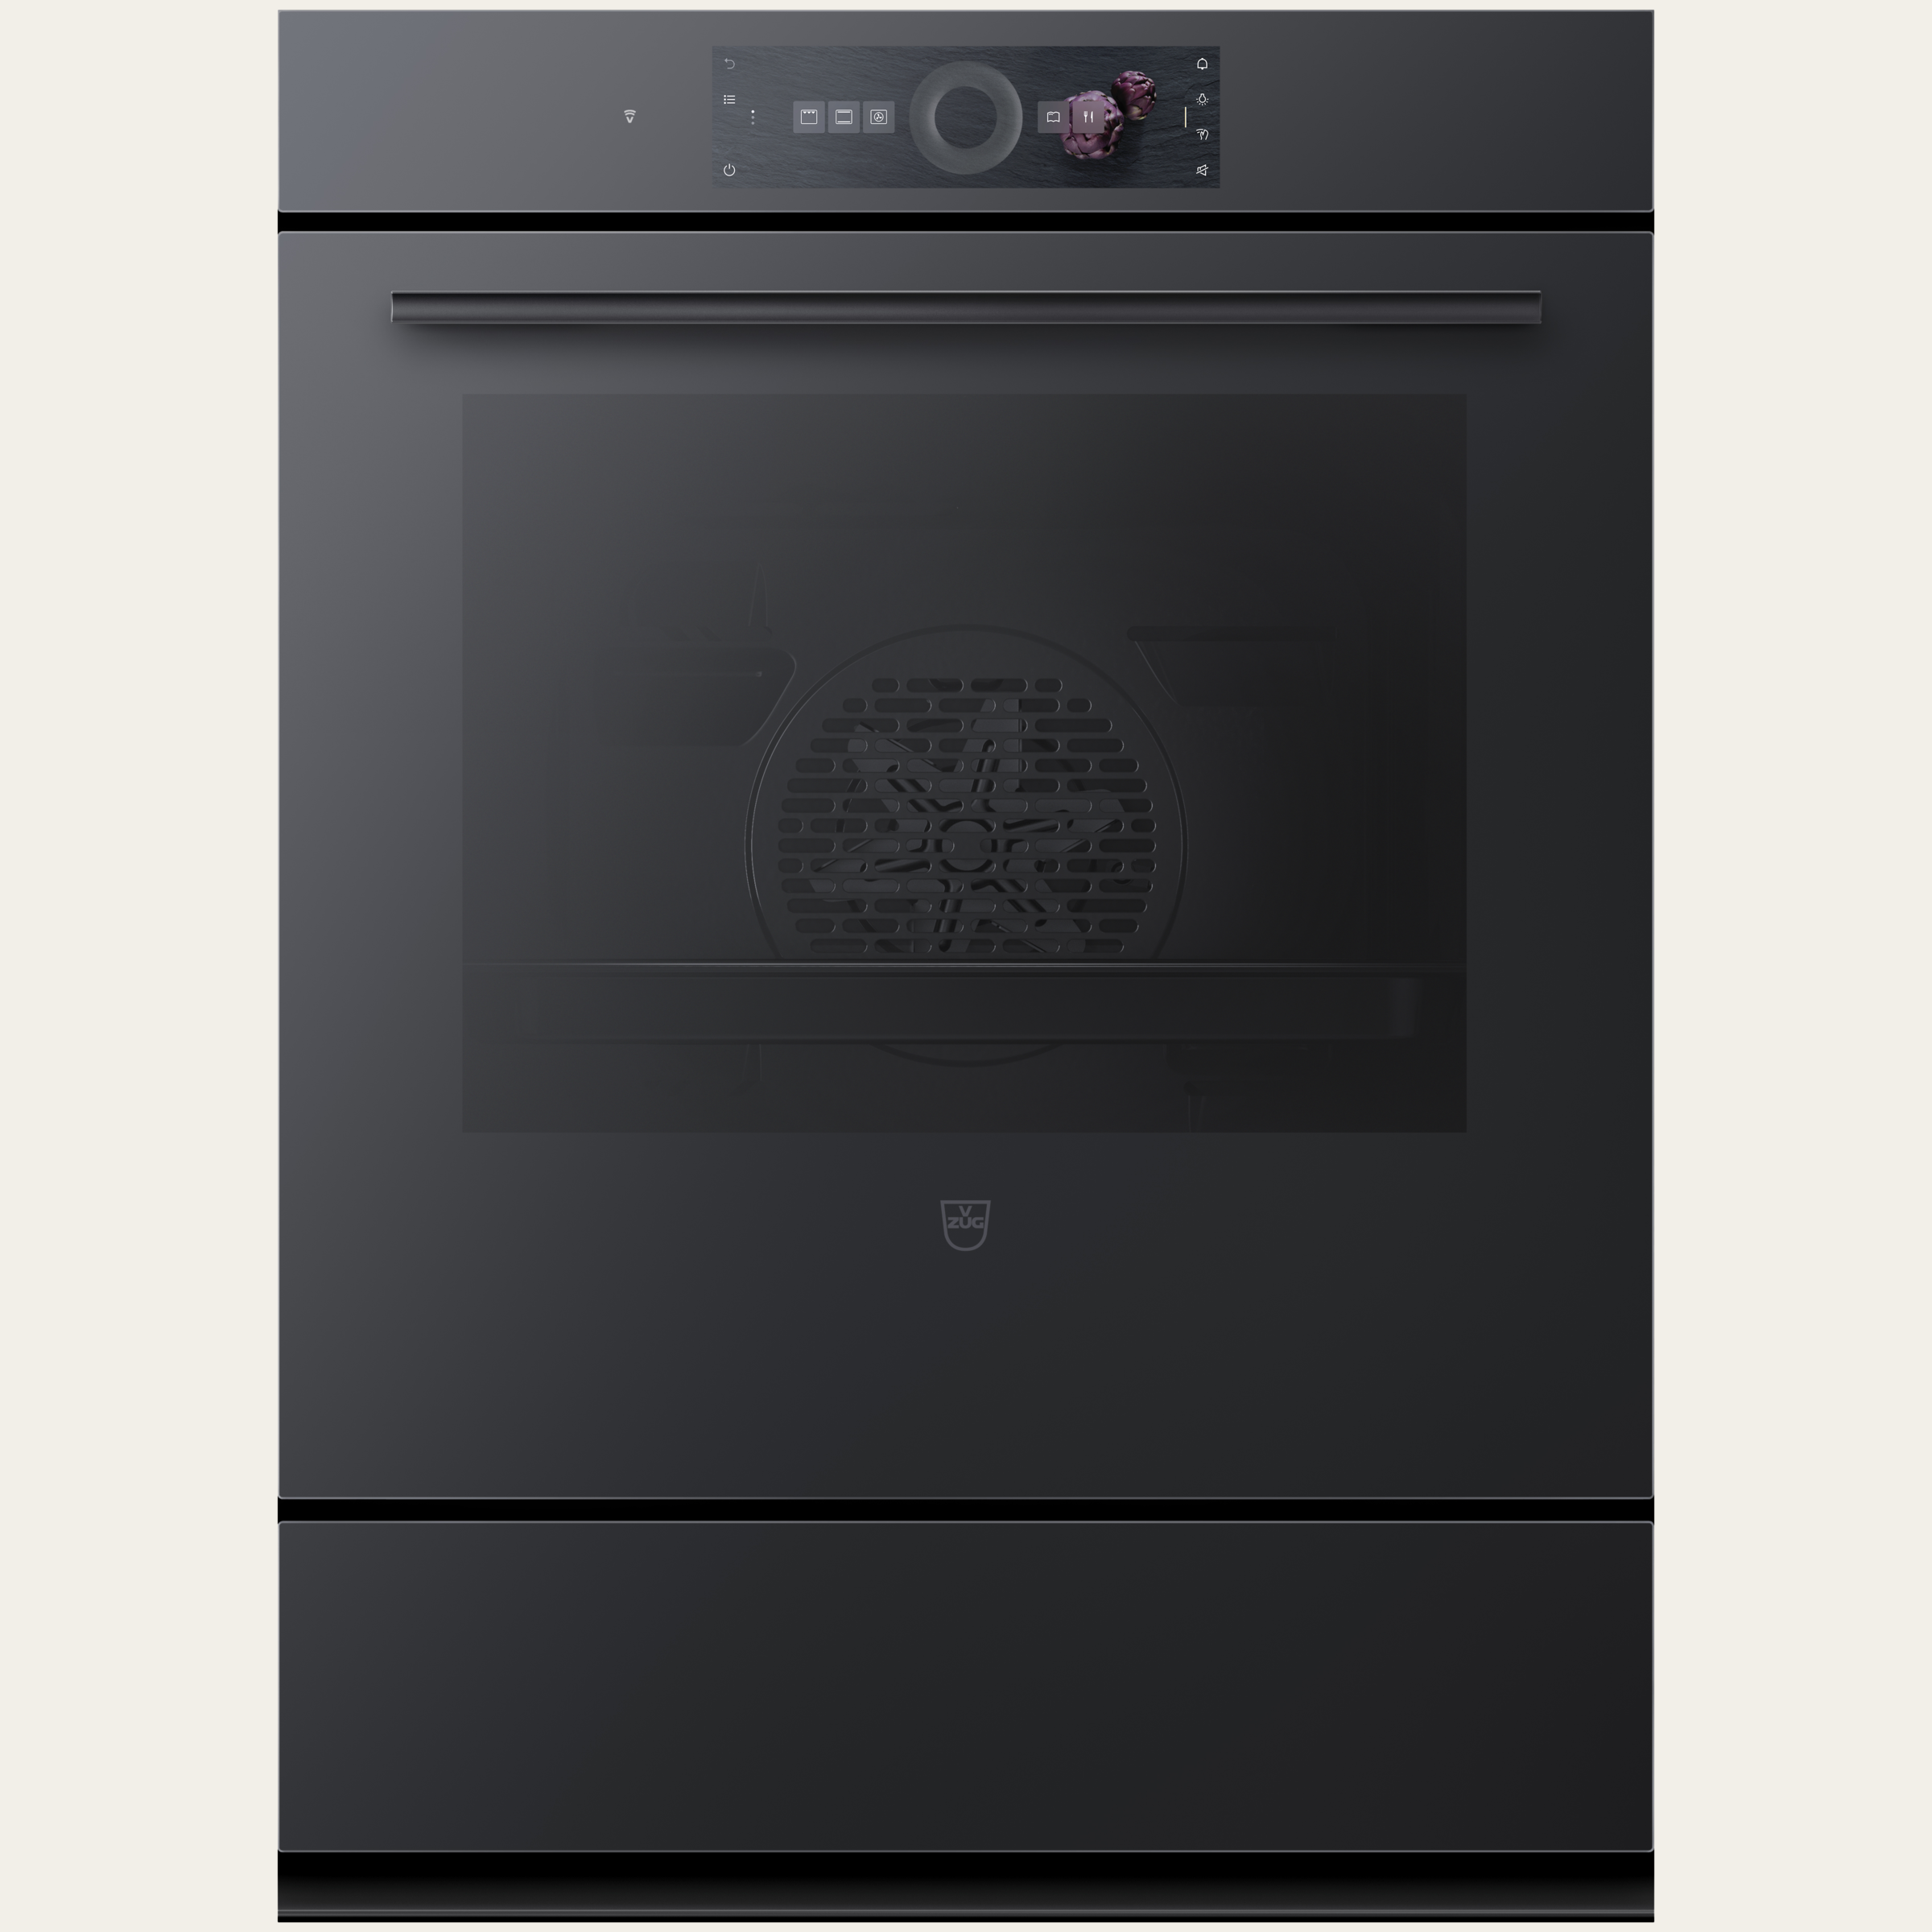 V-ZUG Oven Combair V4000 76PC, Standard width: 55 cm, Standard height: 76.2 cm, Black mirror glass, Touchscreen with CircleSlider, V-ZUG-Home, Appliance drawer, Pyrolytic self-cleaning